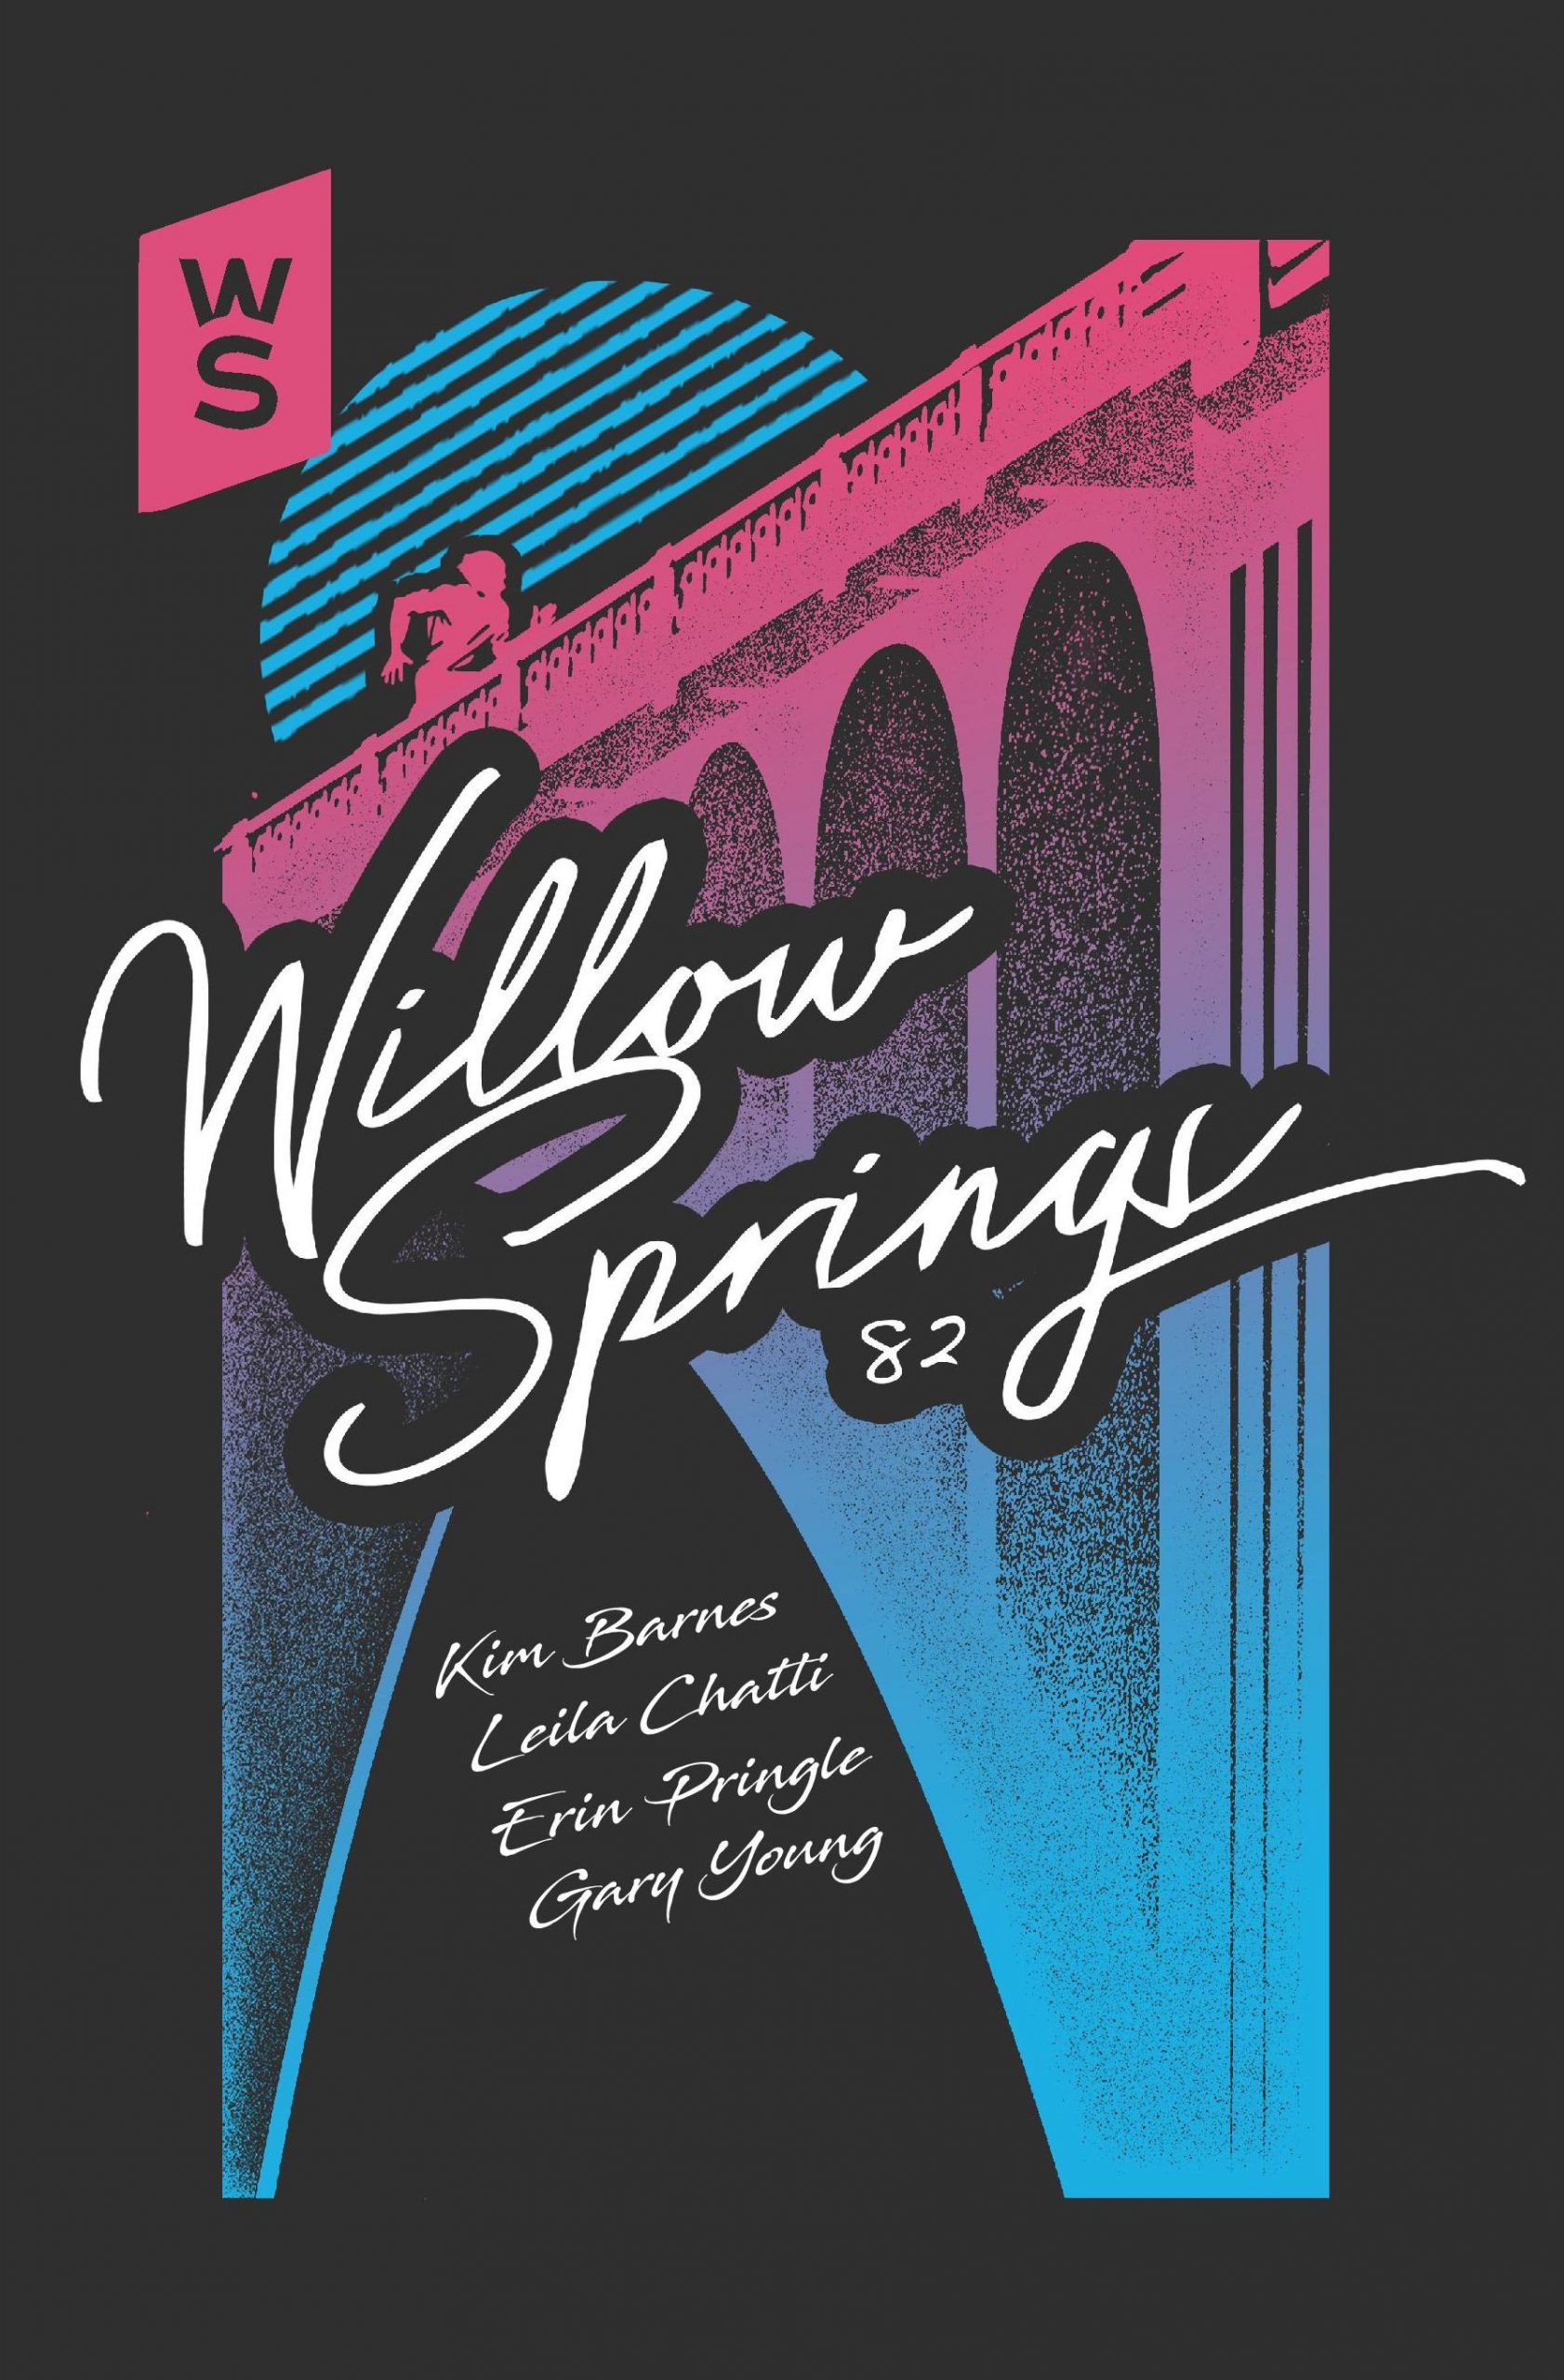 Issue 82 Cover shows Chris Bovery print of a bridge in pink and blue with Willow Springs in decorative font.